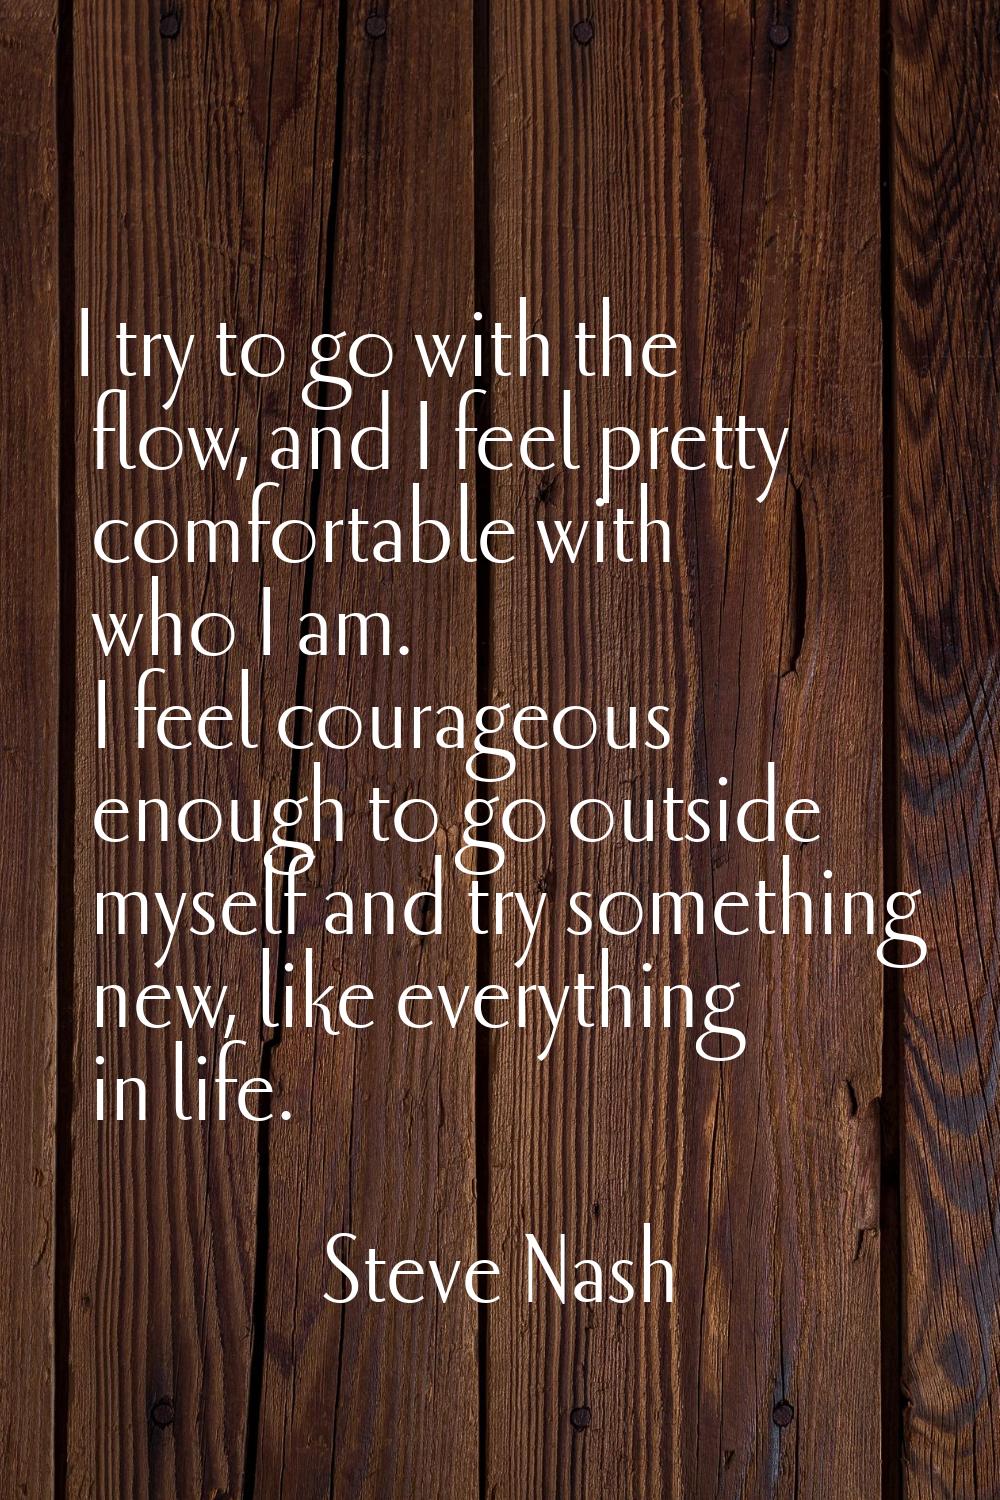 I try to go with the flow, and I feel pretty comfortable with who I am. I feel courageous enough to